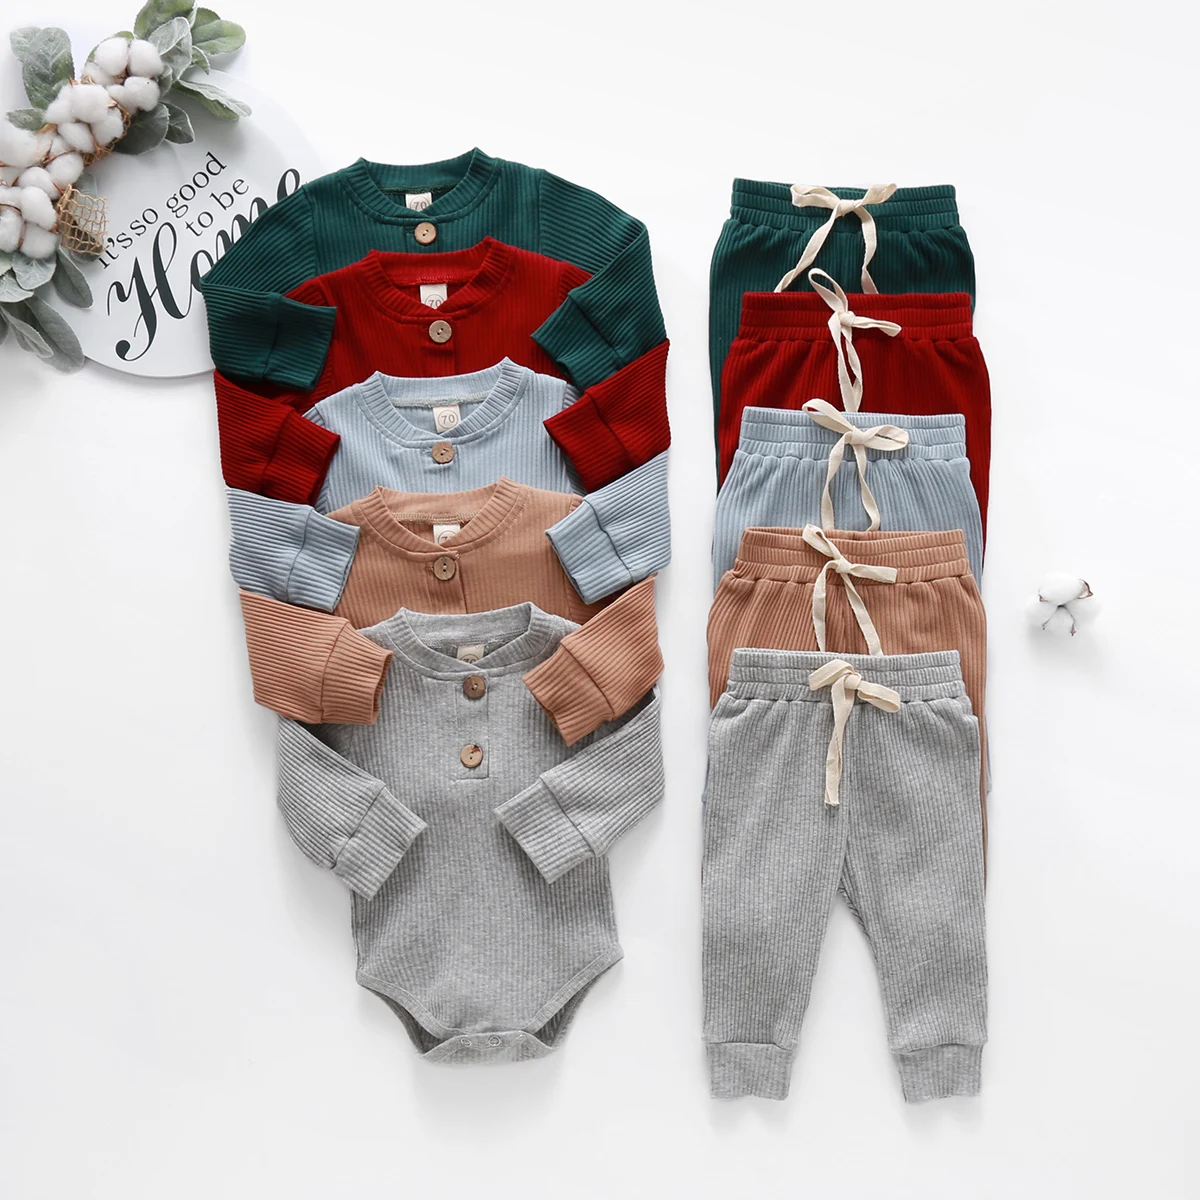 2021 Spring Autumn Infant Newborn Baby Girls Boys Ribbed Solid Clothes Sets Long Sleeve Bodysuits Elastic Pants Set, Gray/green/red